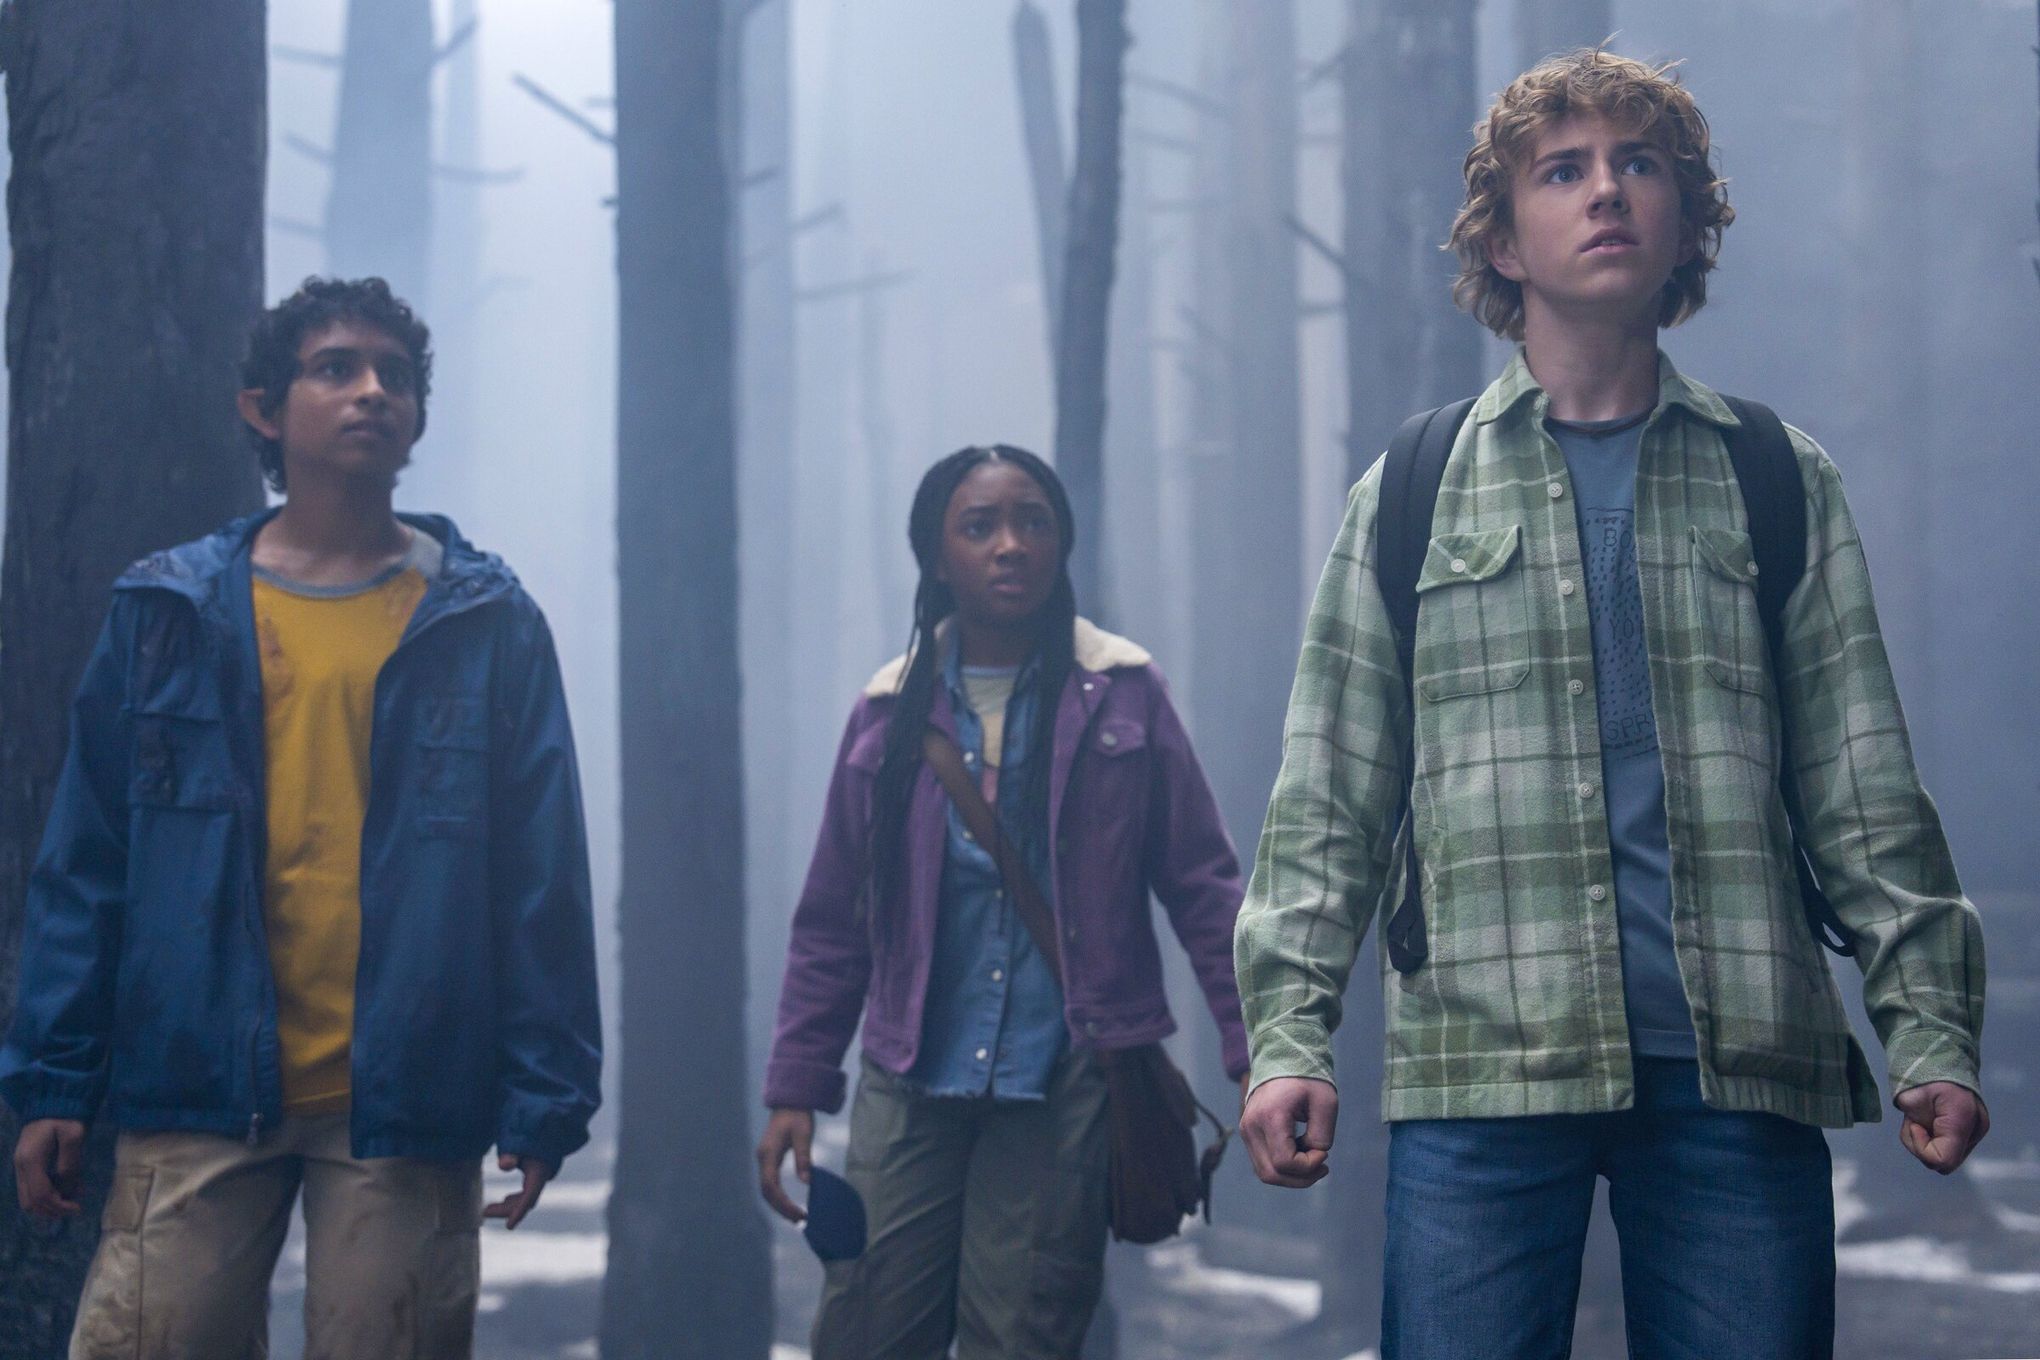 Camp Half-Blood Comes to Life in New 'Percy Jackson and the